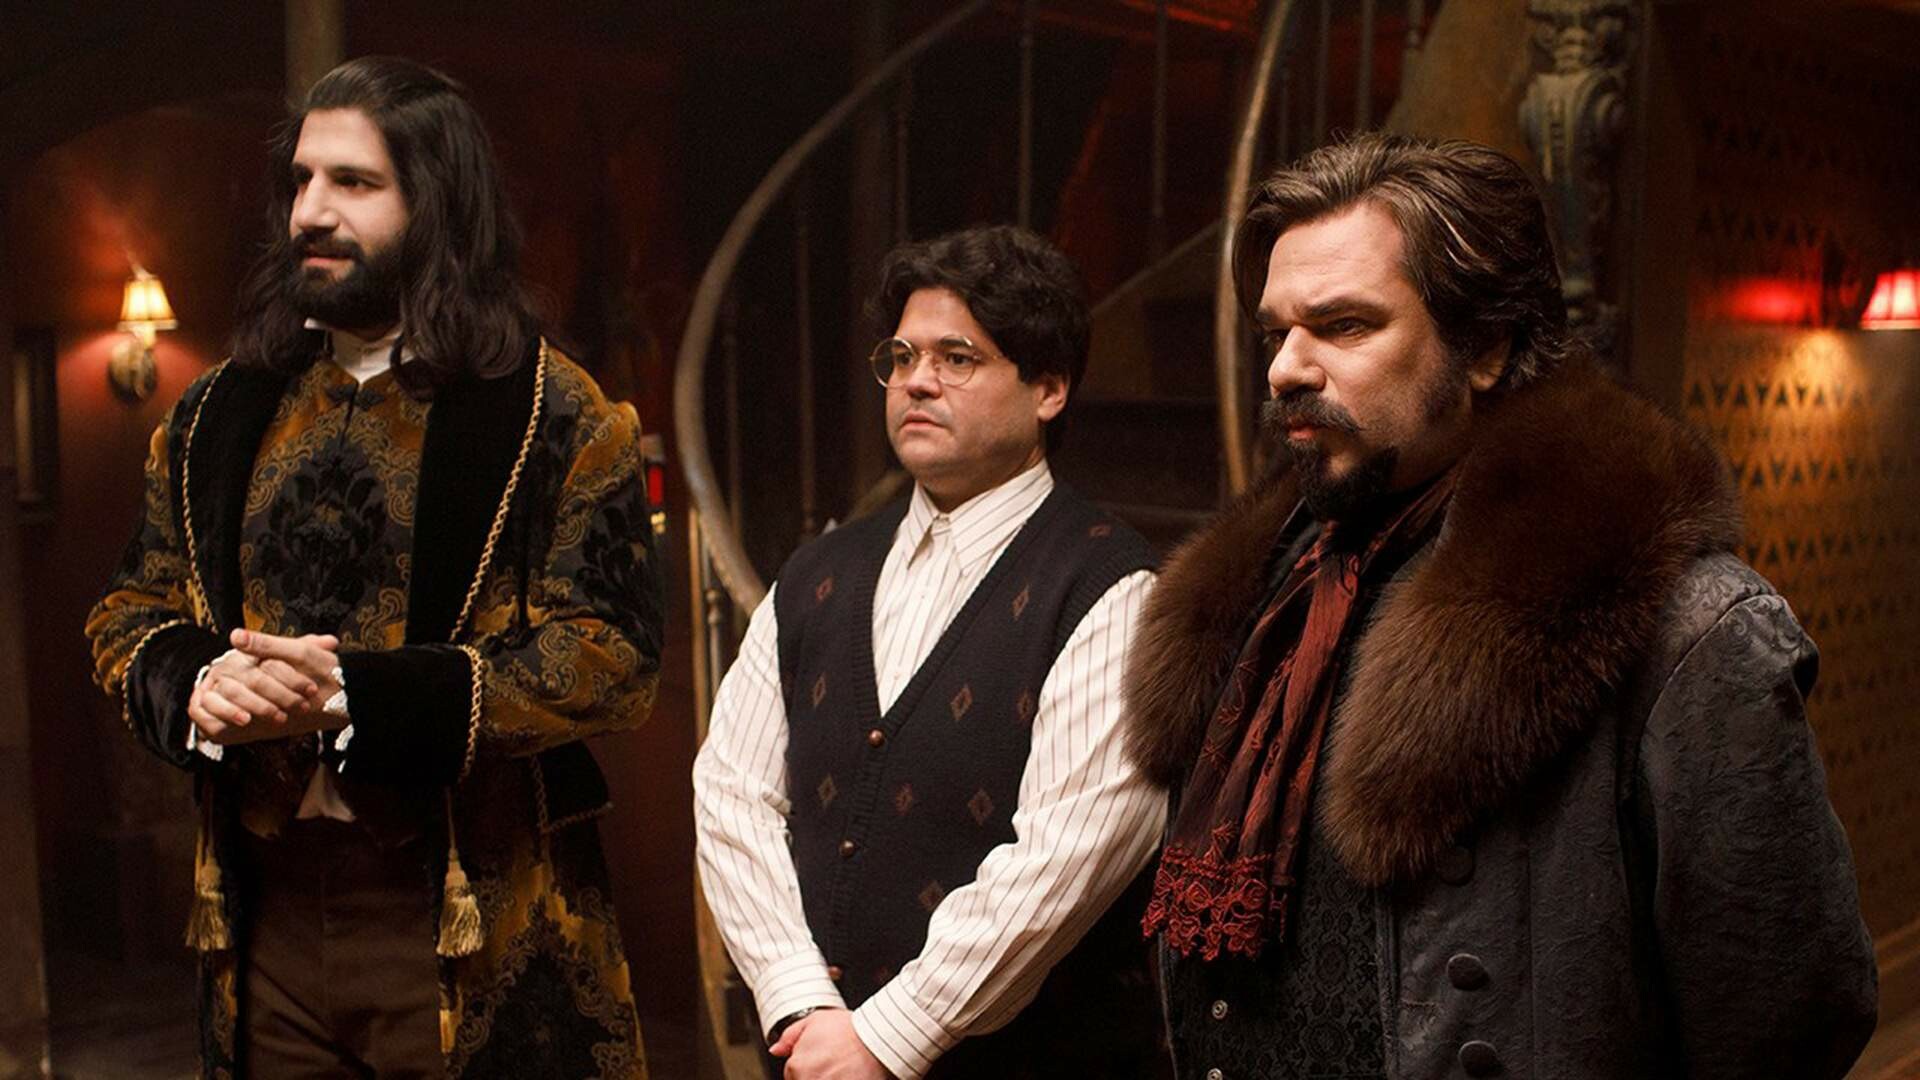 What We Do in the Shadows: The show was nominated for 17 Emmy Awards, including Outstanding Comedy Series in 2020 and 2022. 1920x1080 Full HD Background.